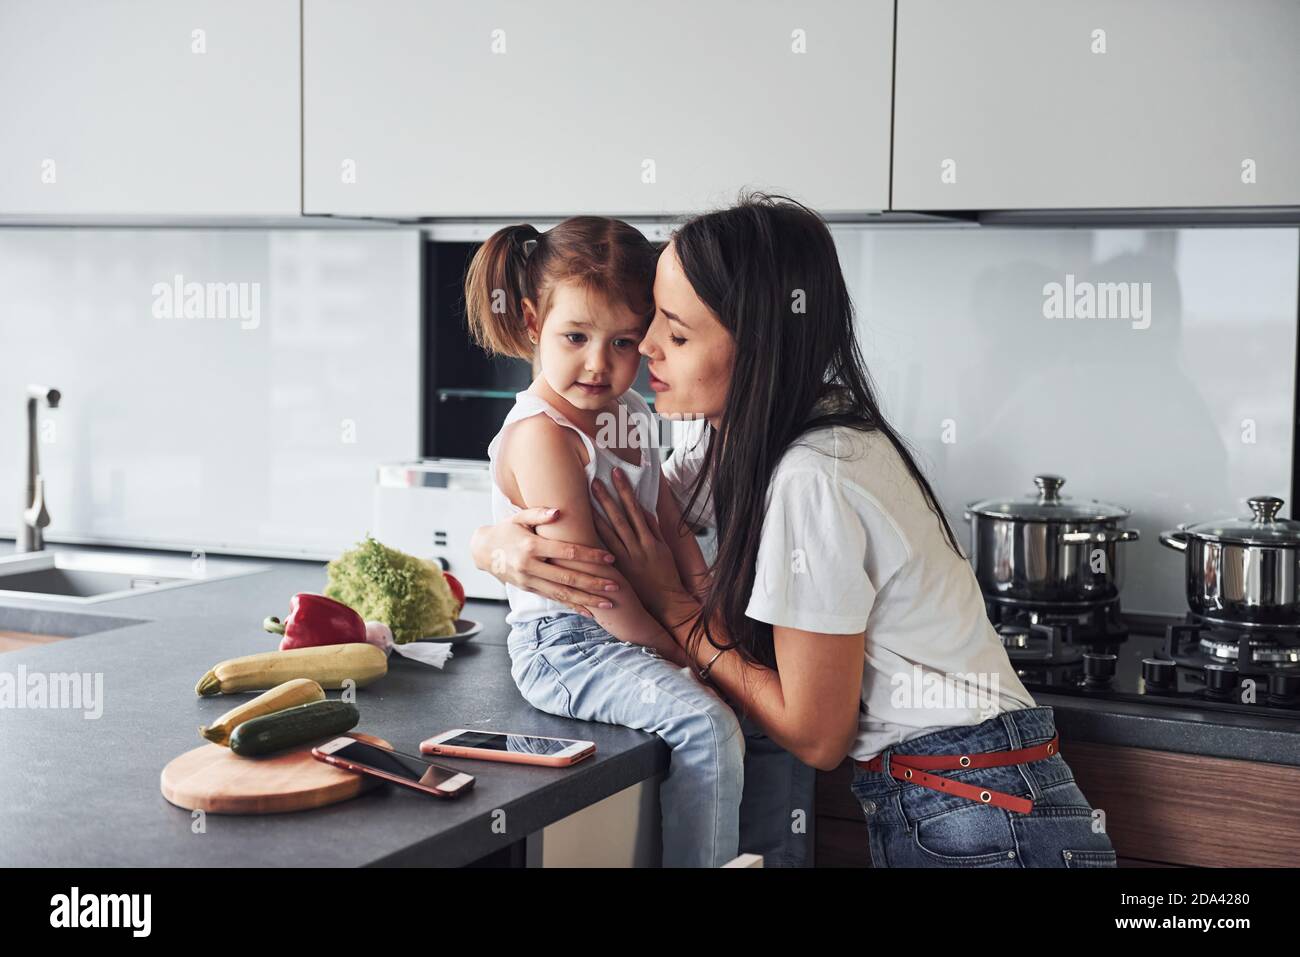 Mother with her little daughter embracing each other indoors in kitchen Stock Photo